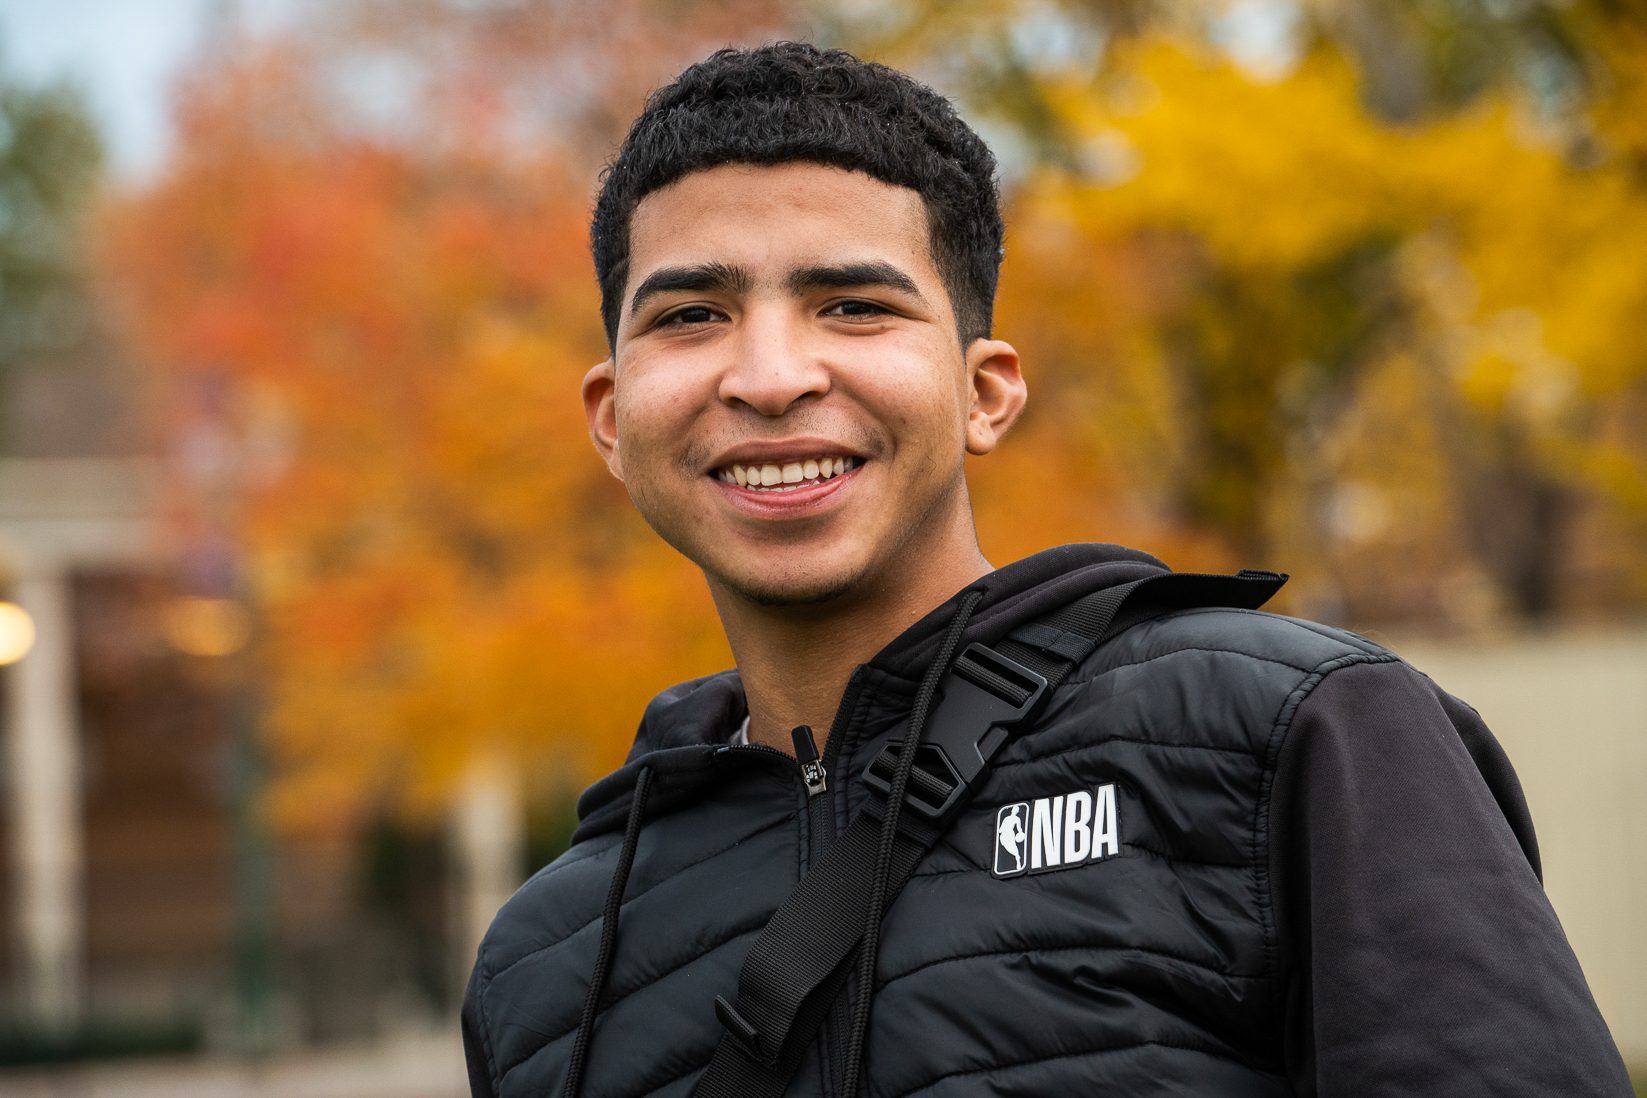 Maikel wearing a black NVA jacket and smiling with fall leaves